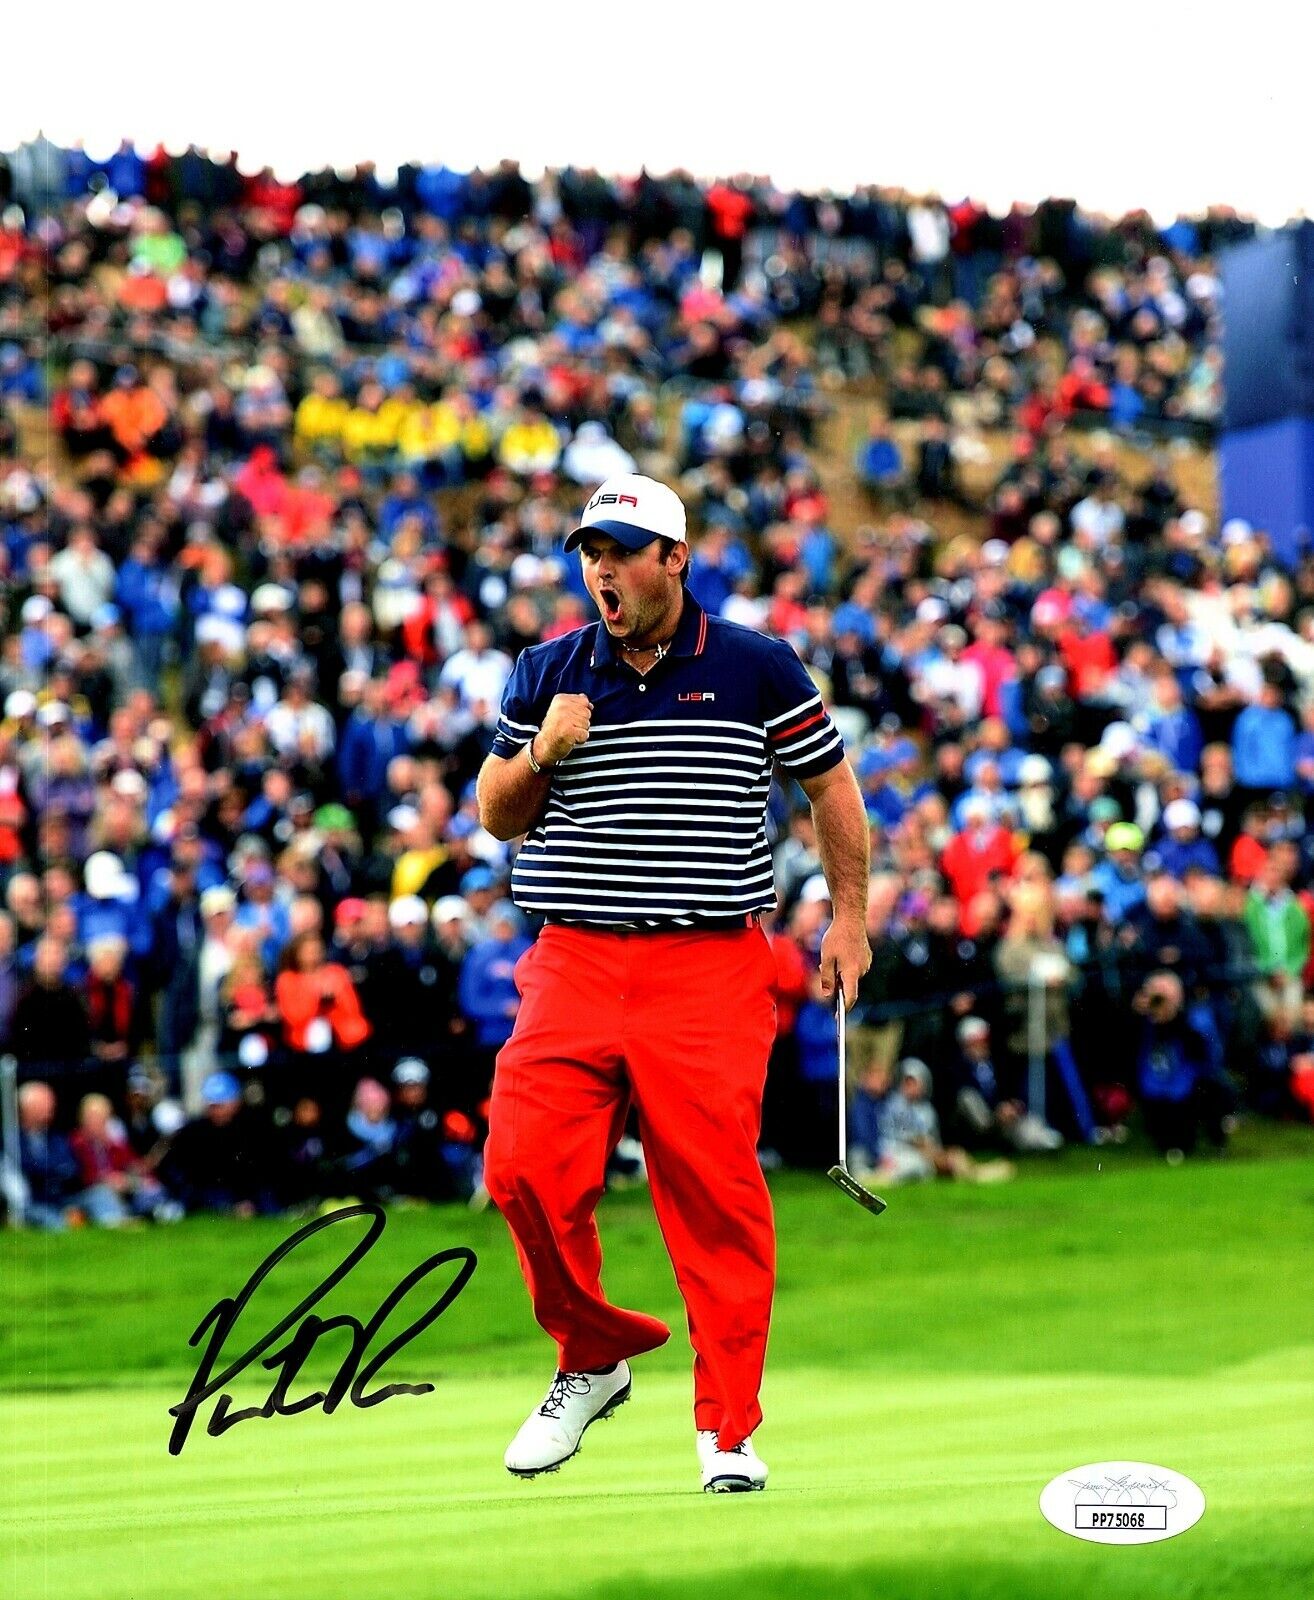 PATRICK REED Autographed SIGNED 8X10 U.S.A. RYDER CUP Photo Poster painting 2014 JSA CERTIFIED